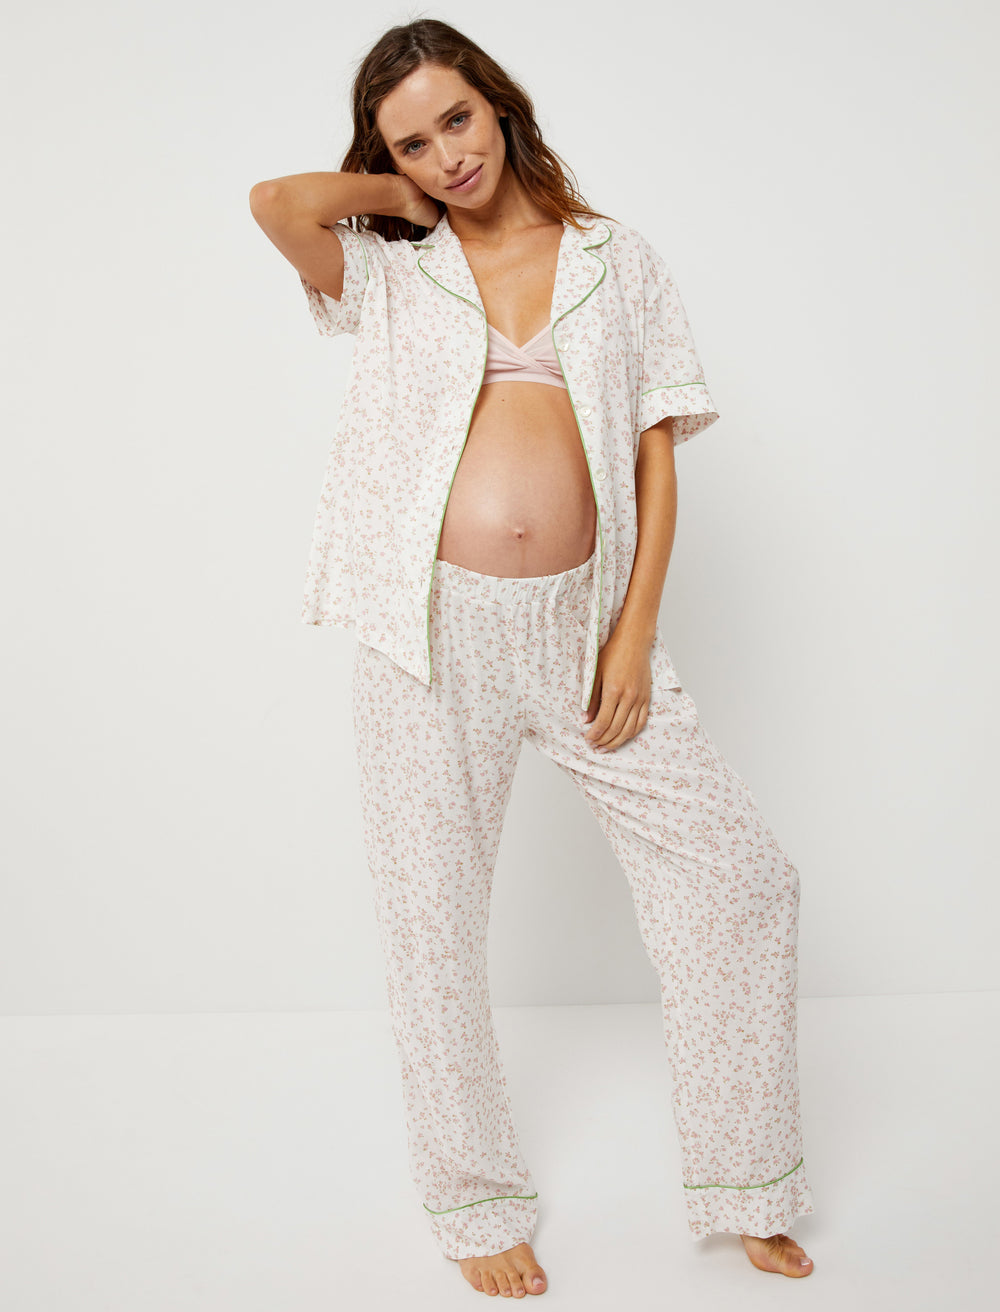 Maternity Tops and Shirts: clothing for pregnancy – Pietro Brunelli